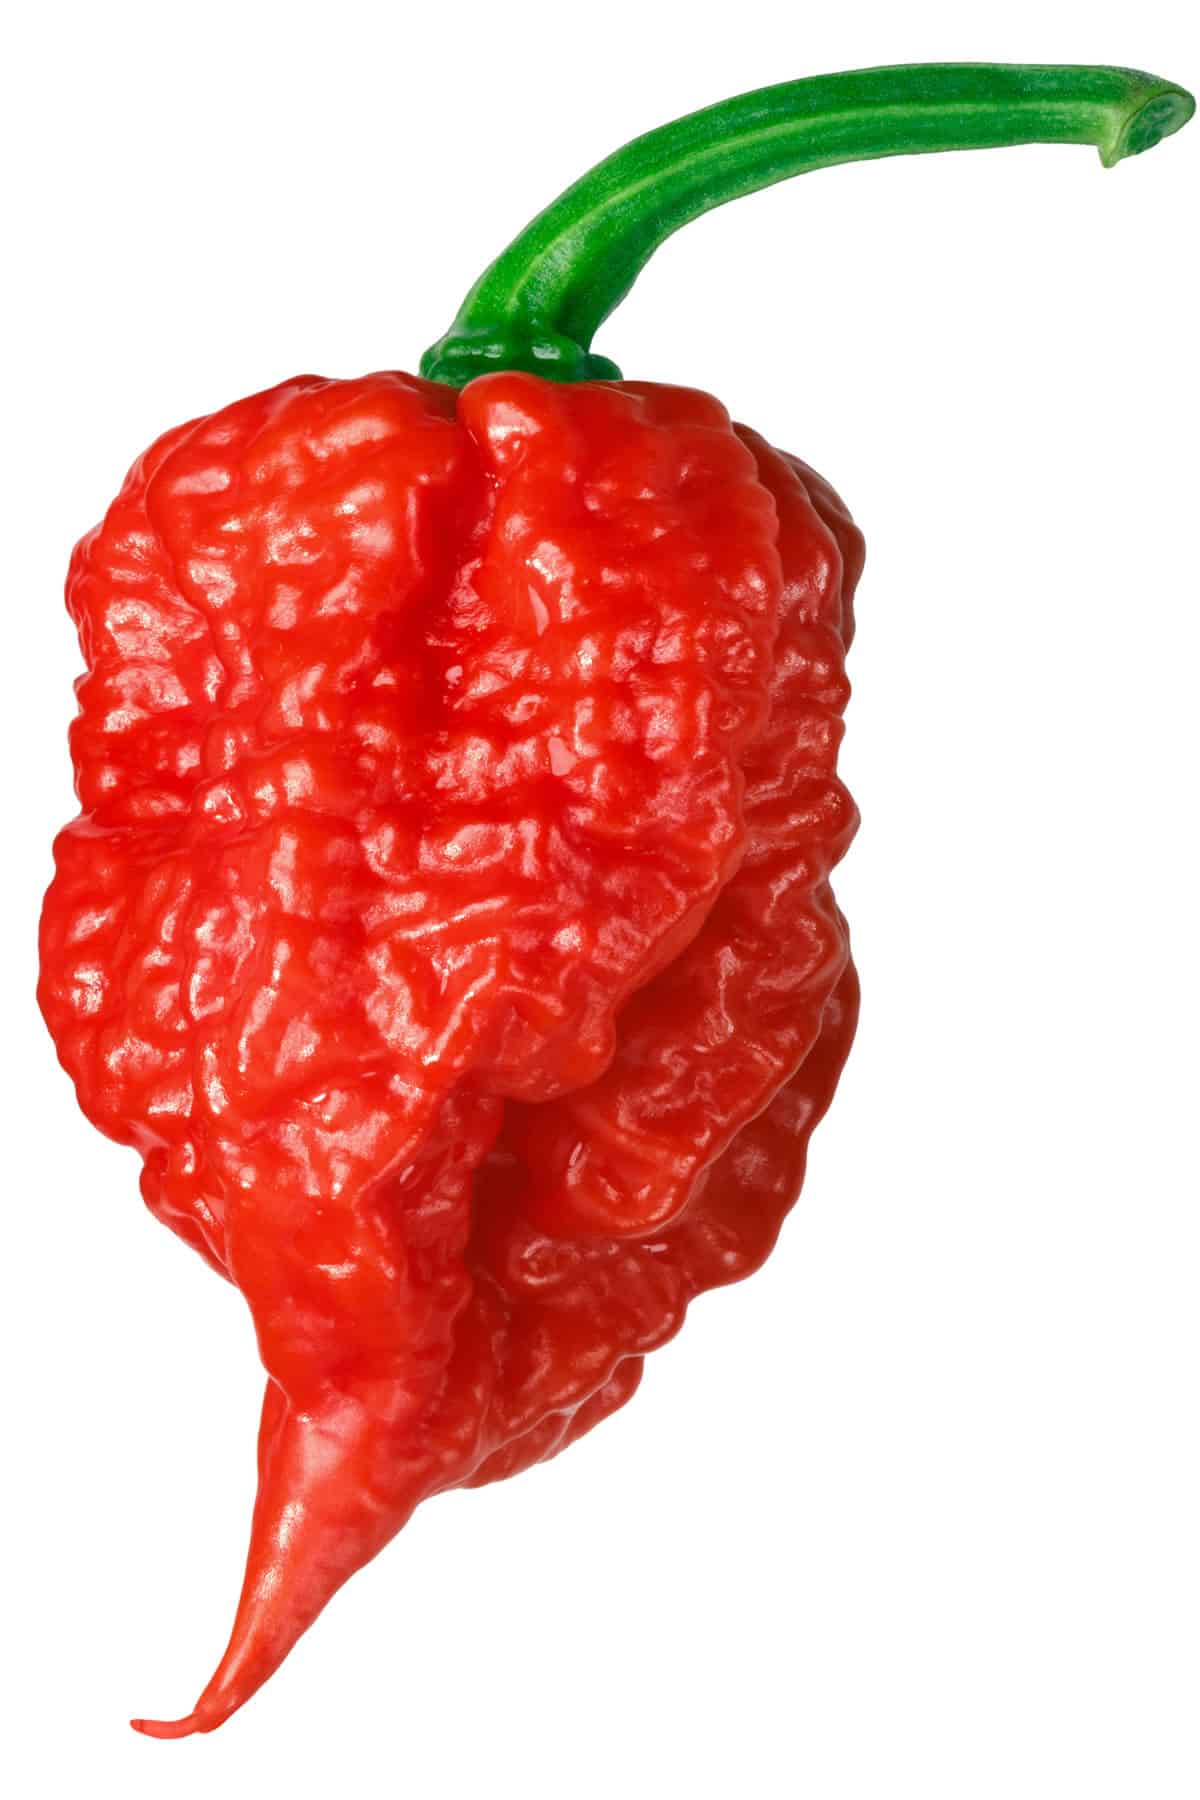 What are the Hottest Peppers in the World? 2019 List - Chili Pepper Madness